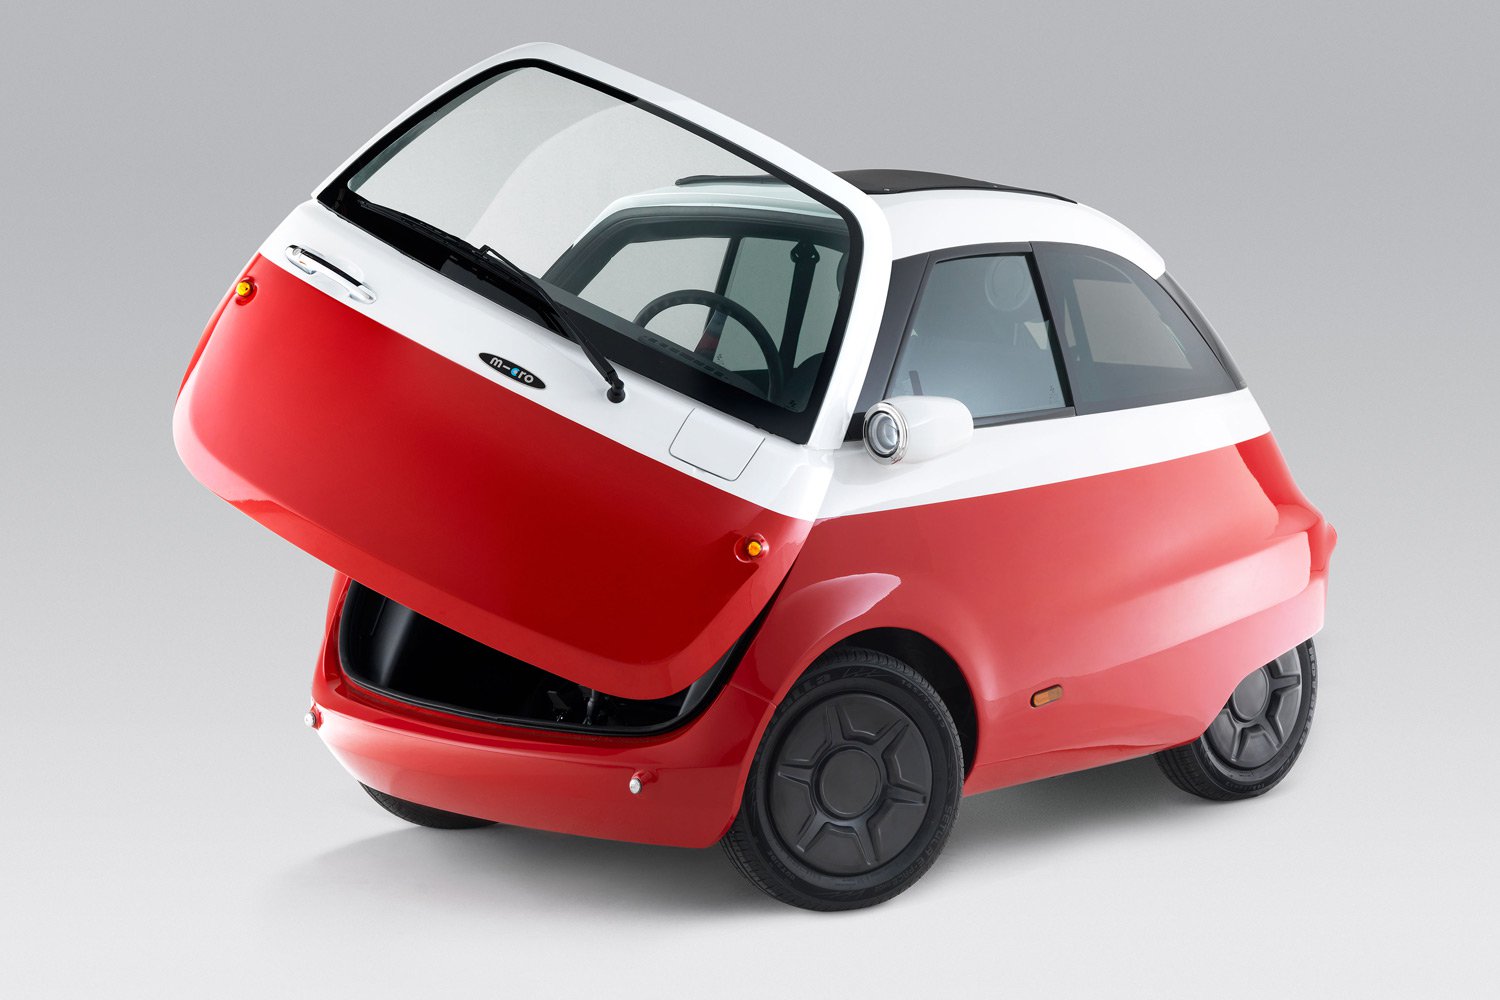 Microlino the new, Isetta inspired electric bubble car